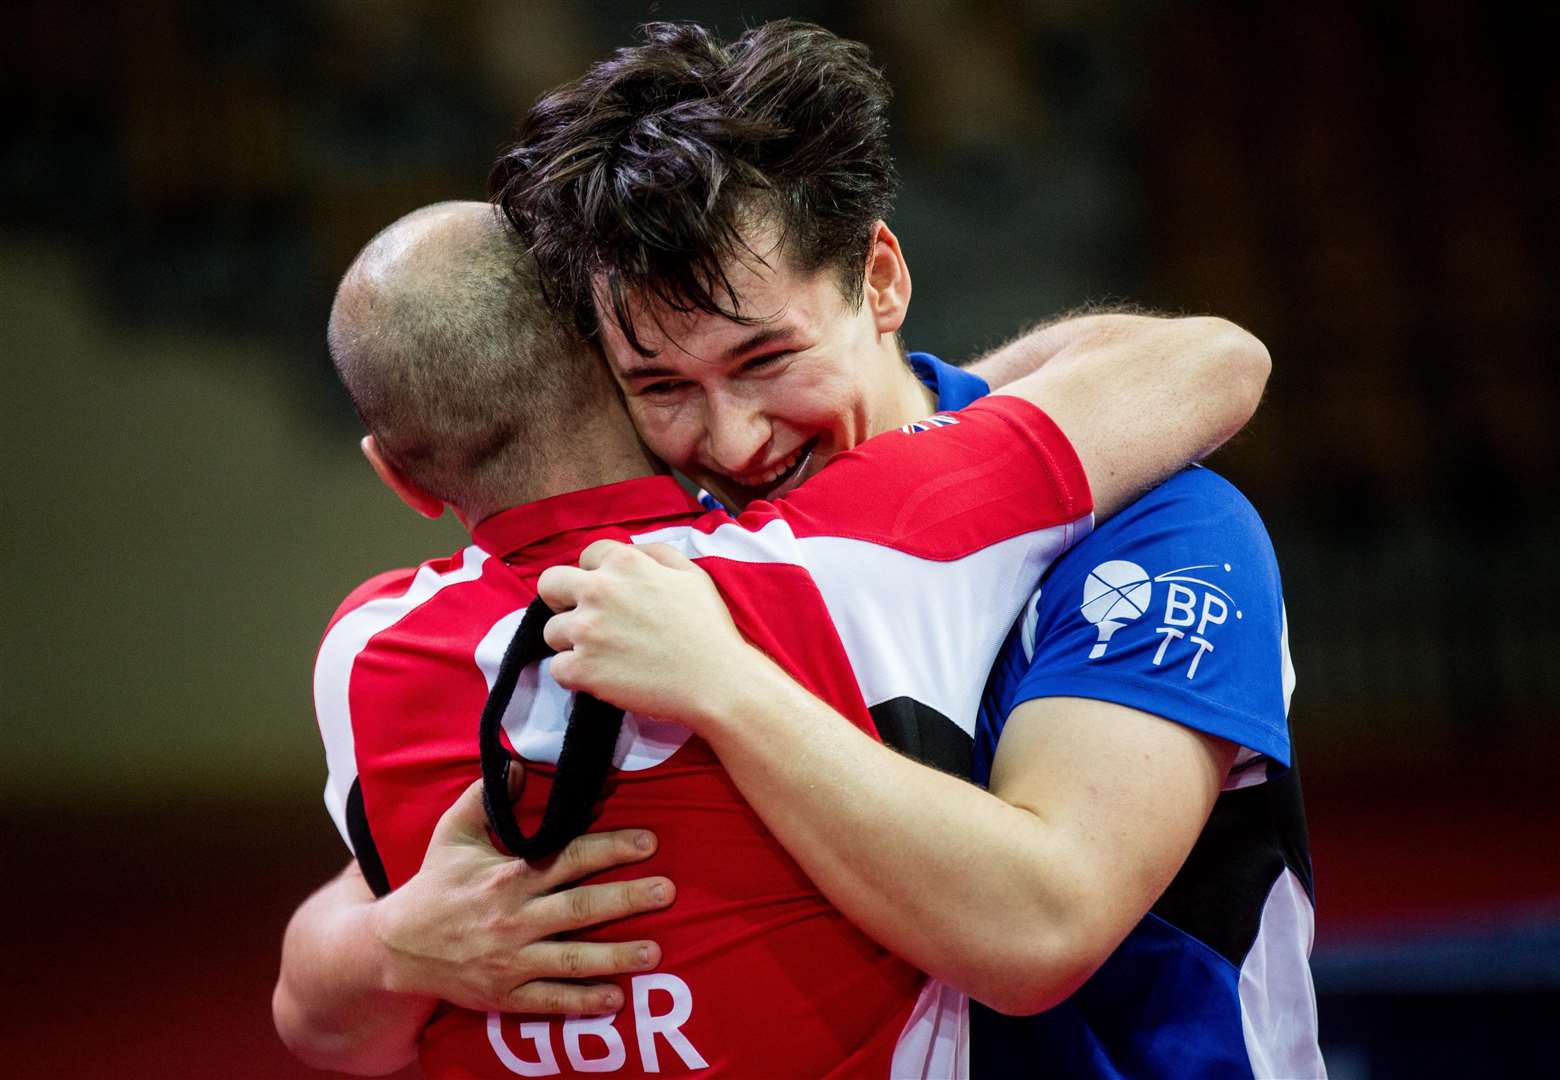 Ross Wilson celebrates with his coach at the World Championships Picture: Vid Ponikvar / Sportida